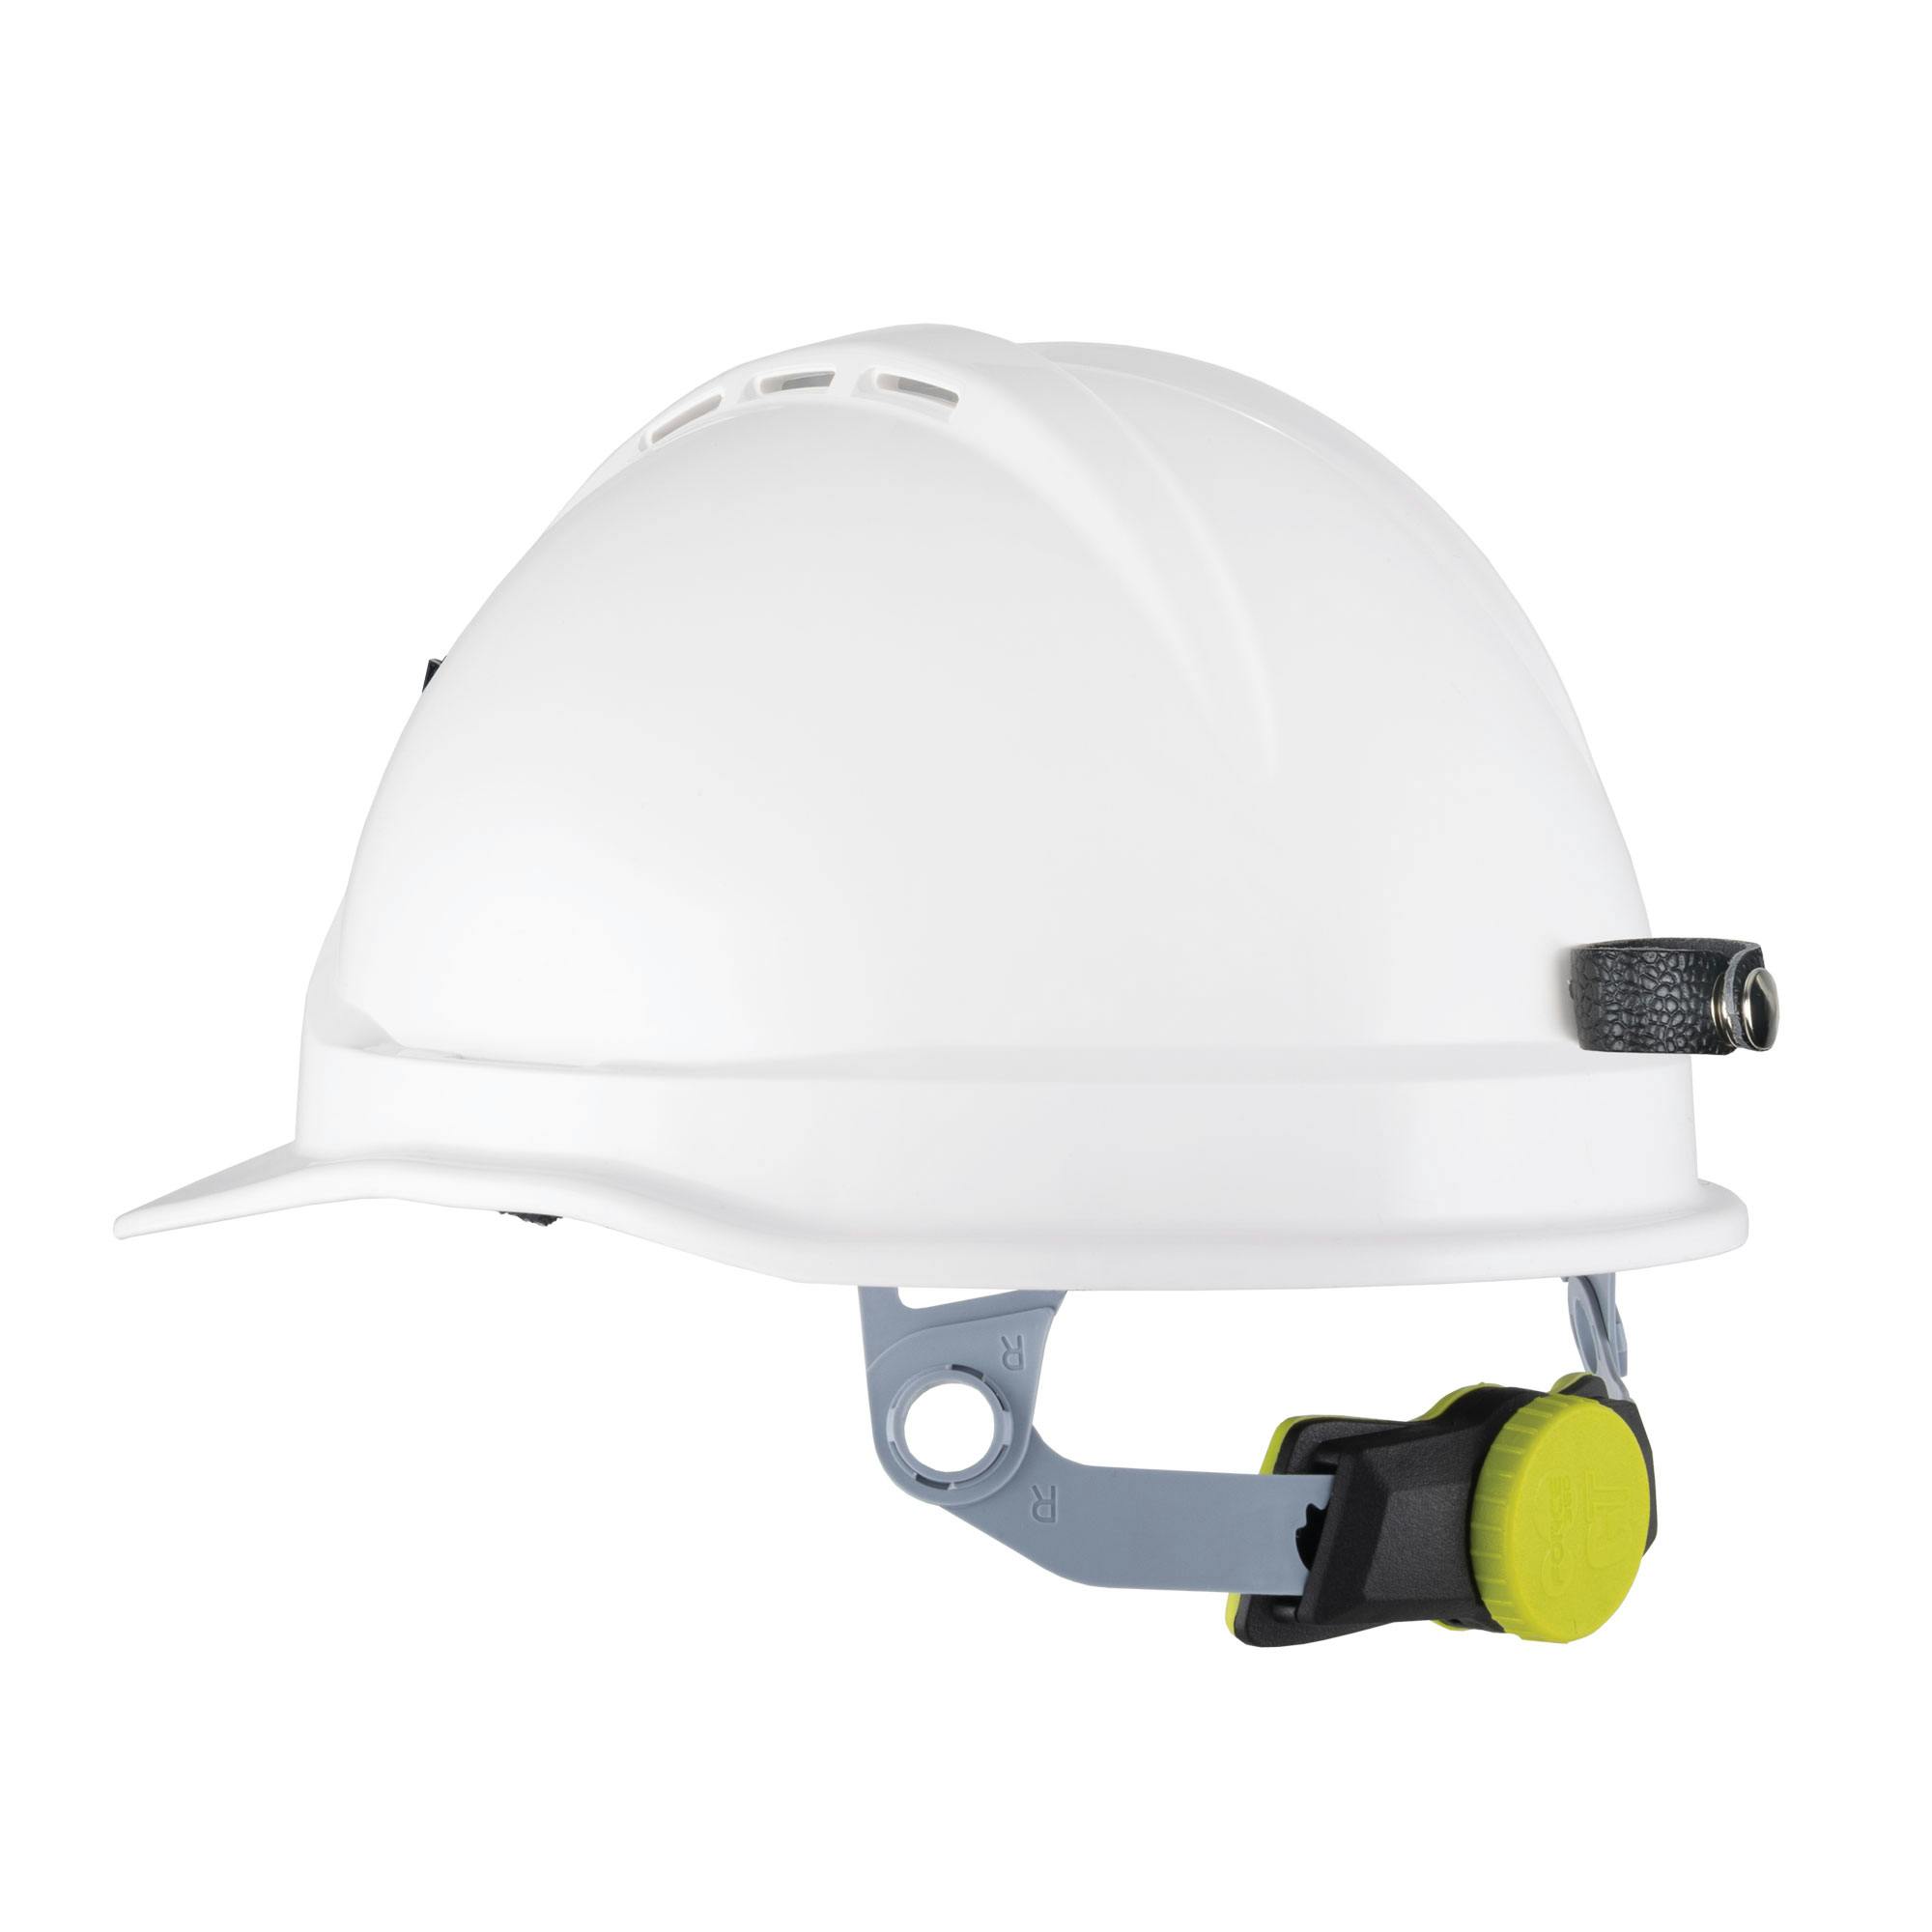 Force360 GTE7 ABS Vented Miners Hard Hat With Ratchet Harness, Type1 (White)